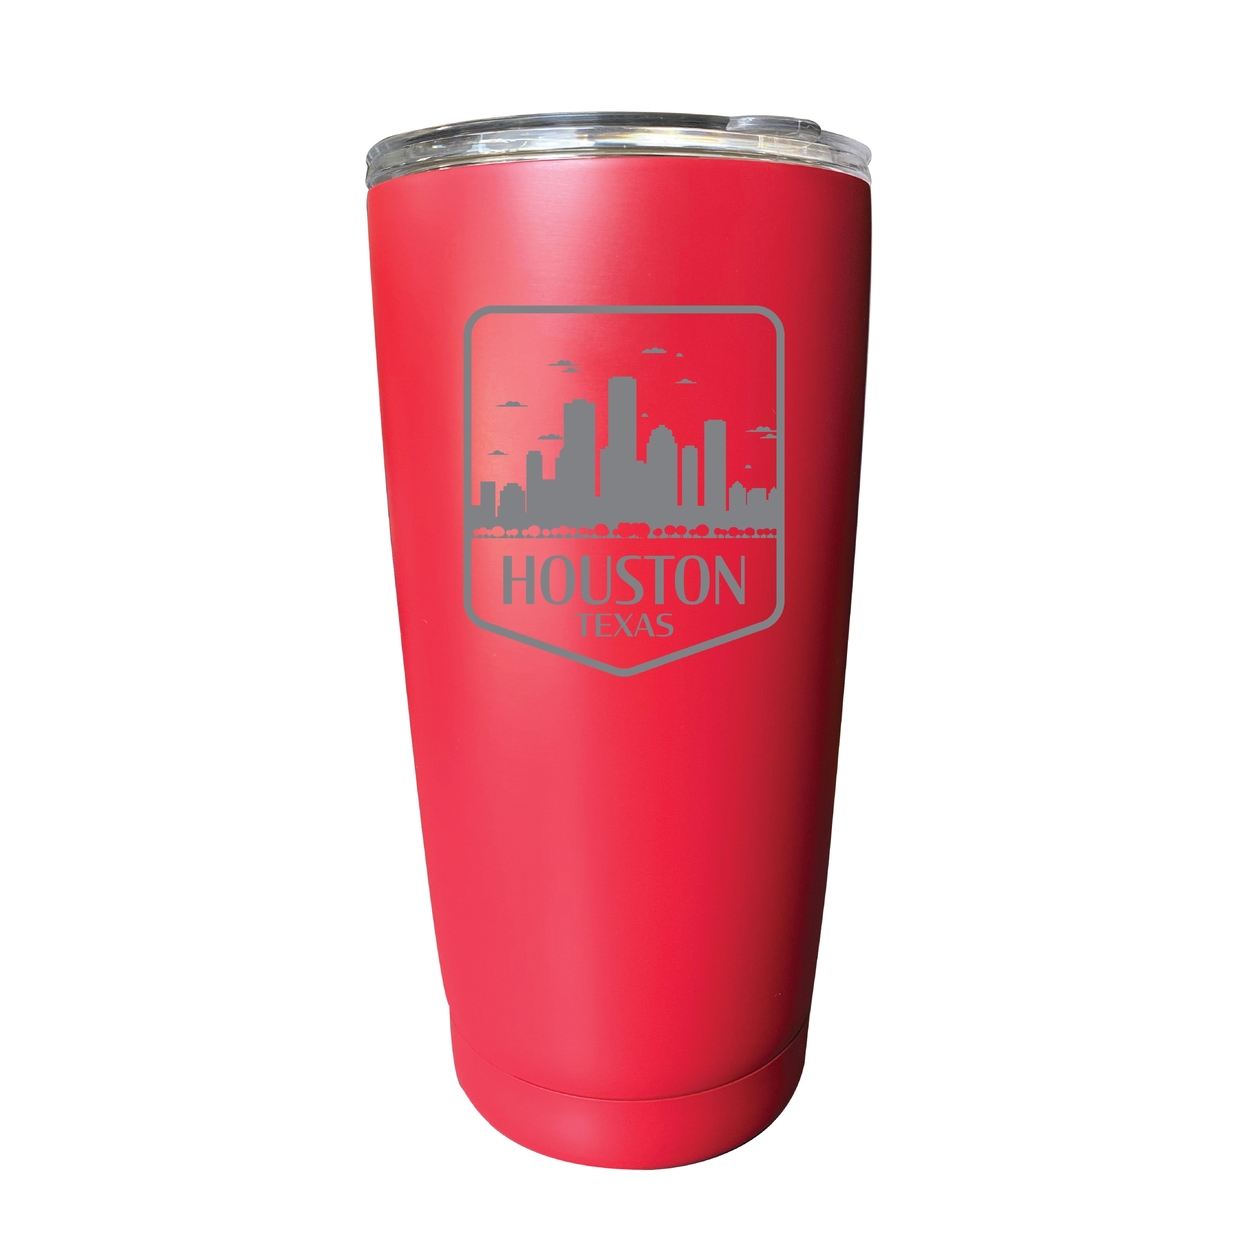 Houston Texas Souvenir 16 Oz Engraved Stainless Steel Insulated Tumbler - Red,,2-Pack